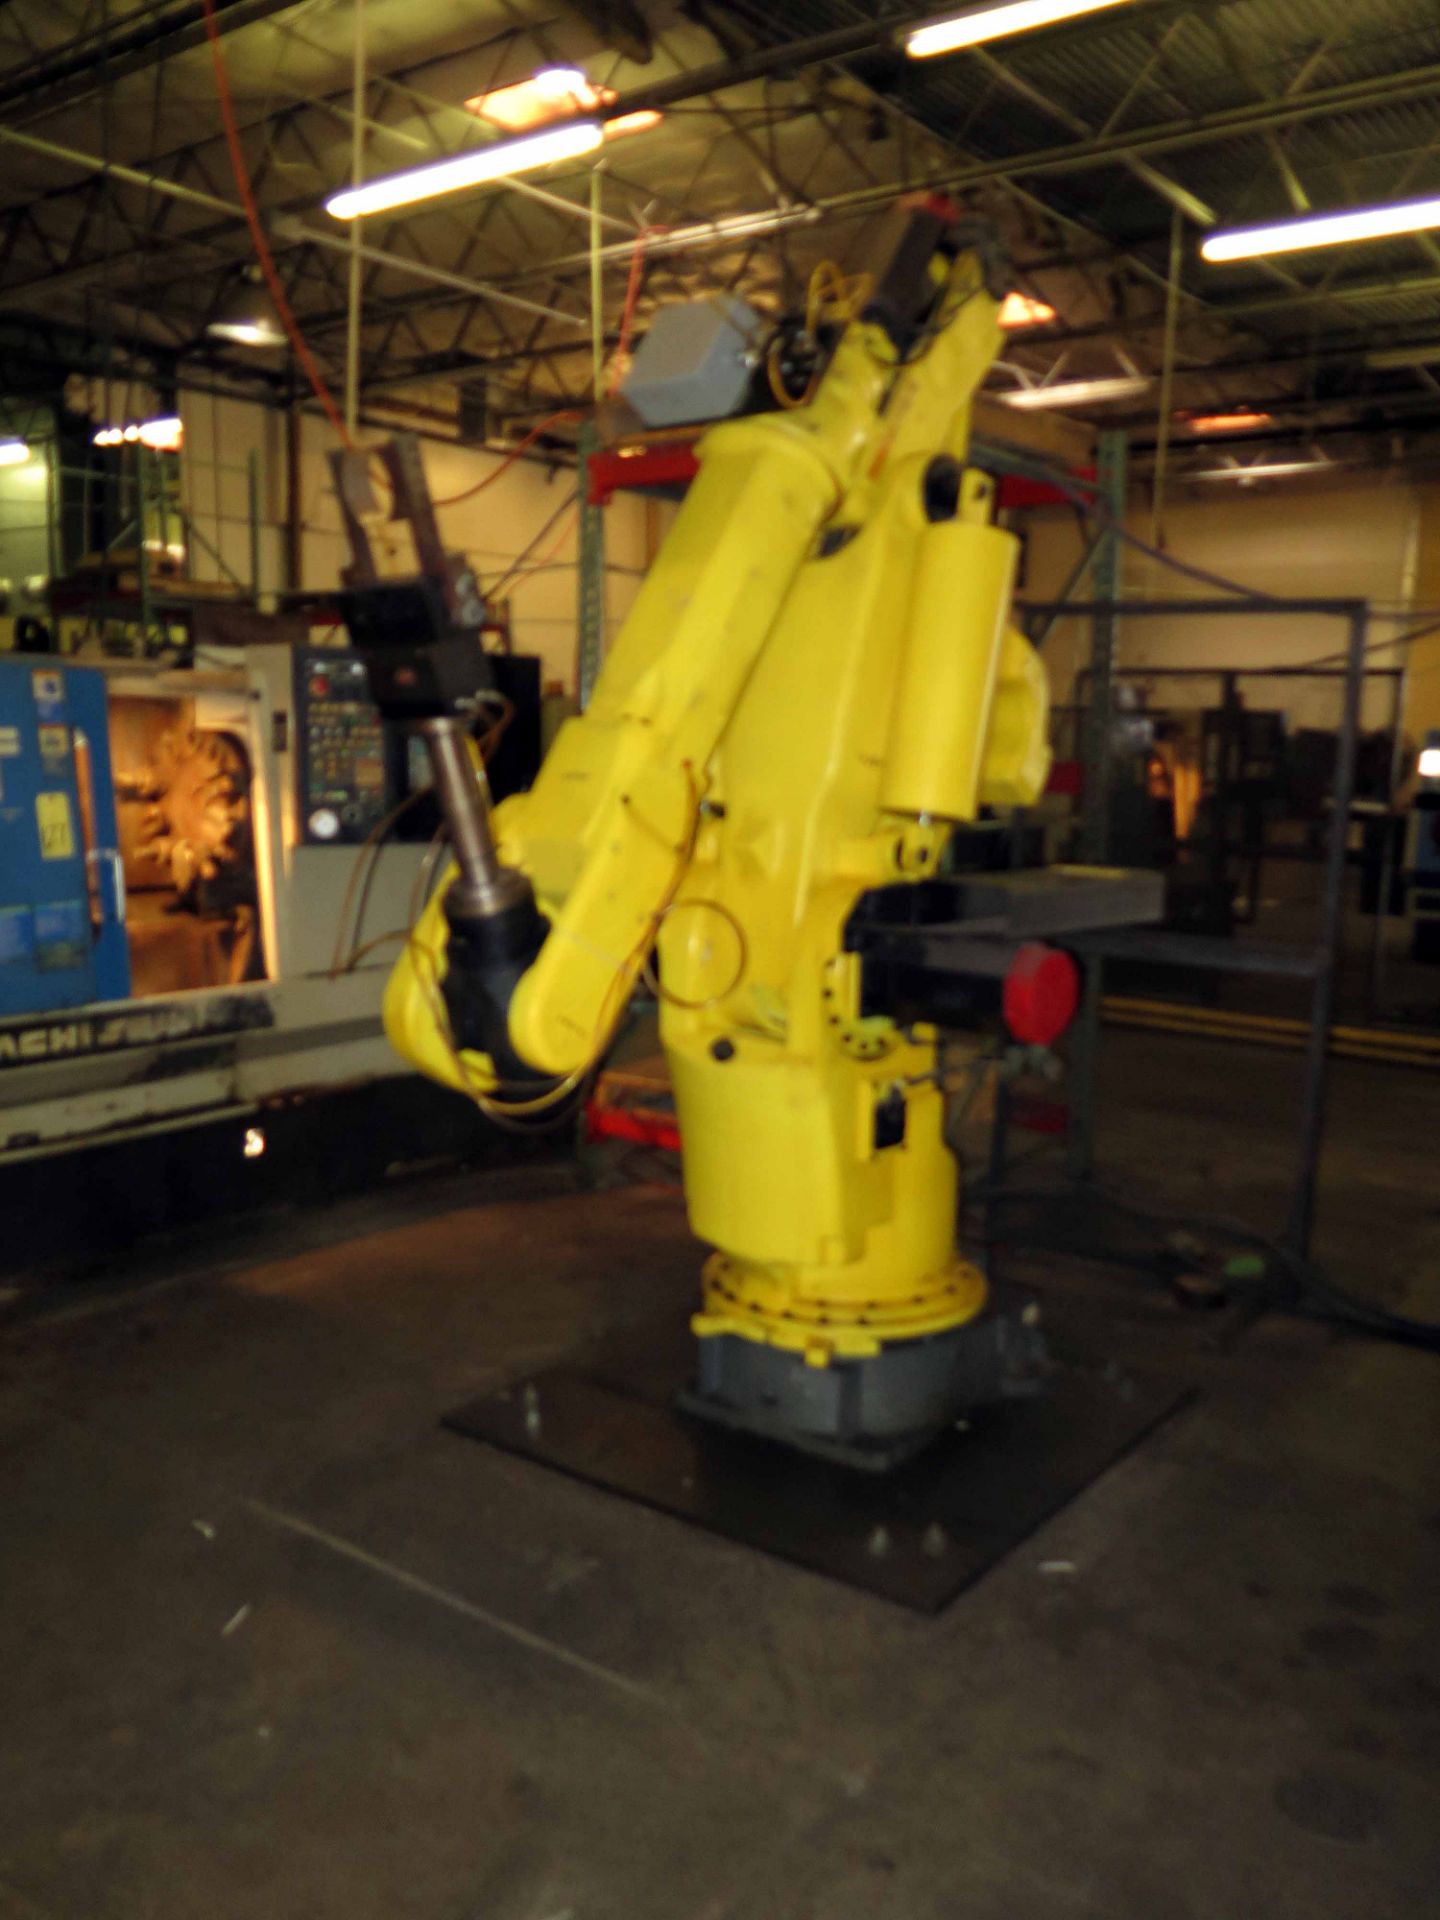 6-AXIS ROBOT, FANUC S-420iW, 341 lb. payload, 112.2" high reach, end effector, S/N E98606447